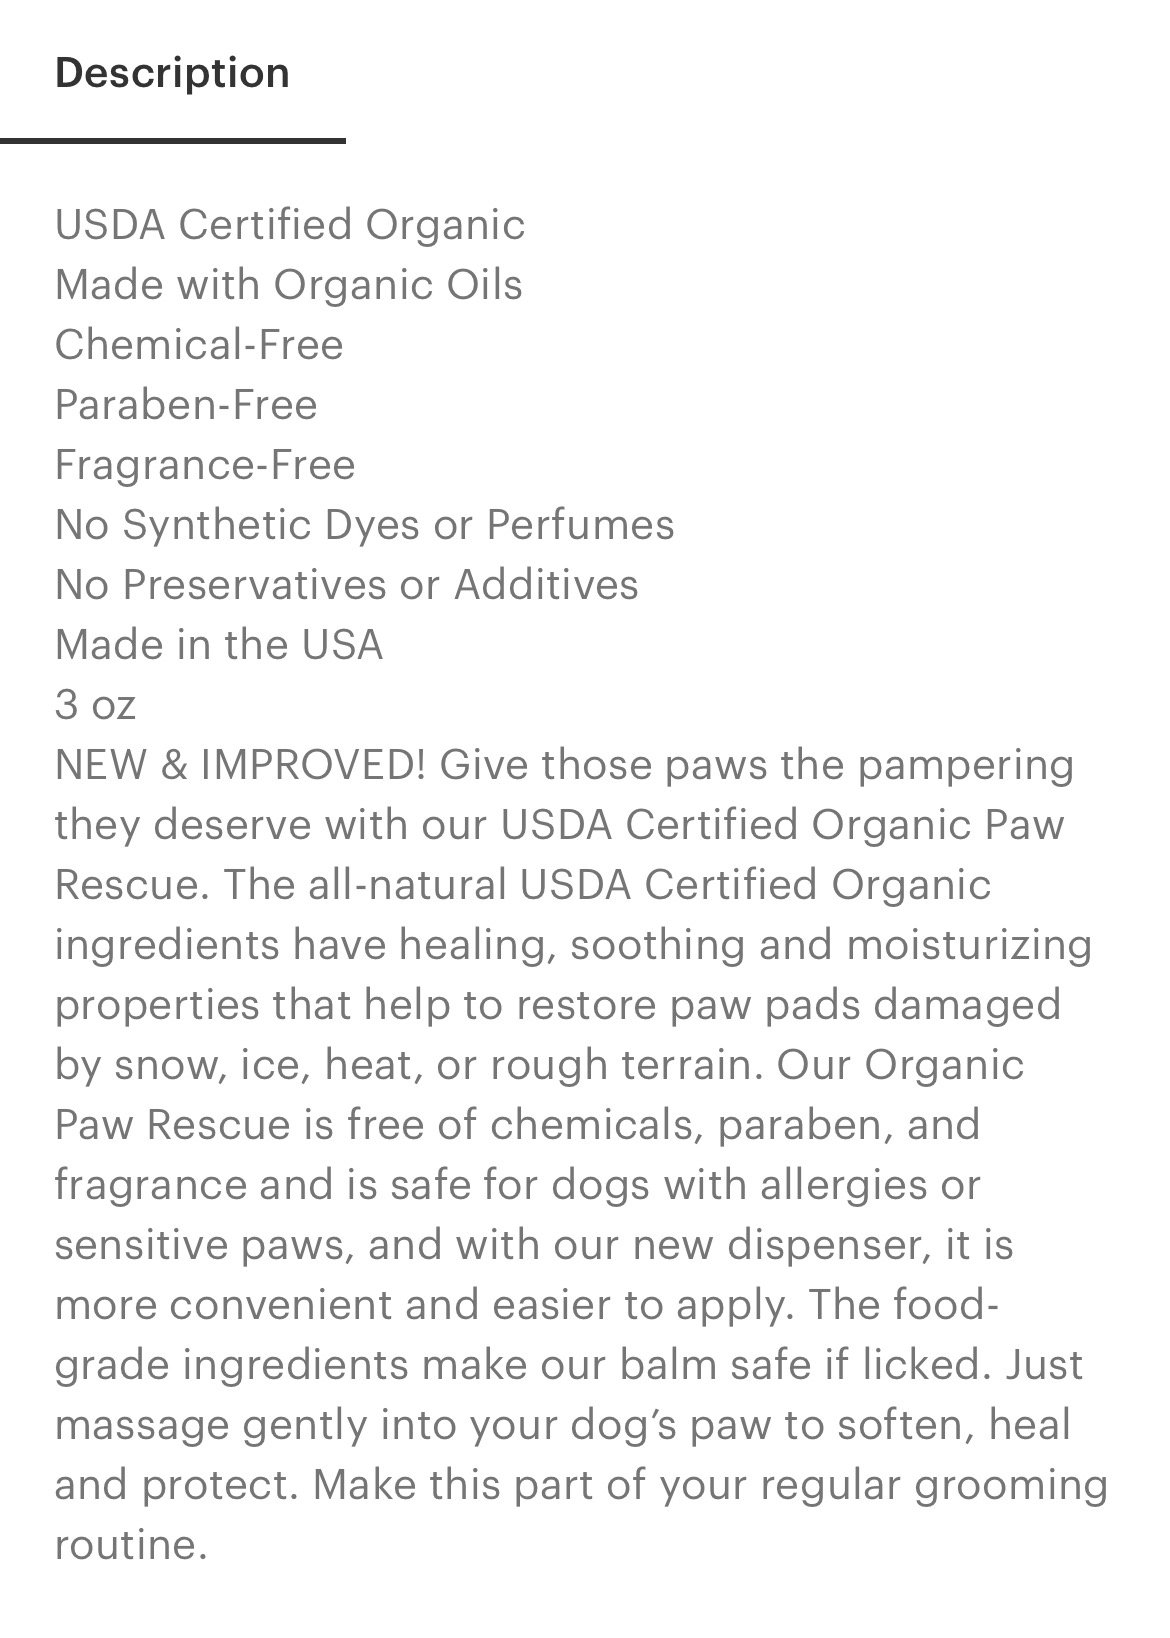 Image of Certified Organic Paw Rescue